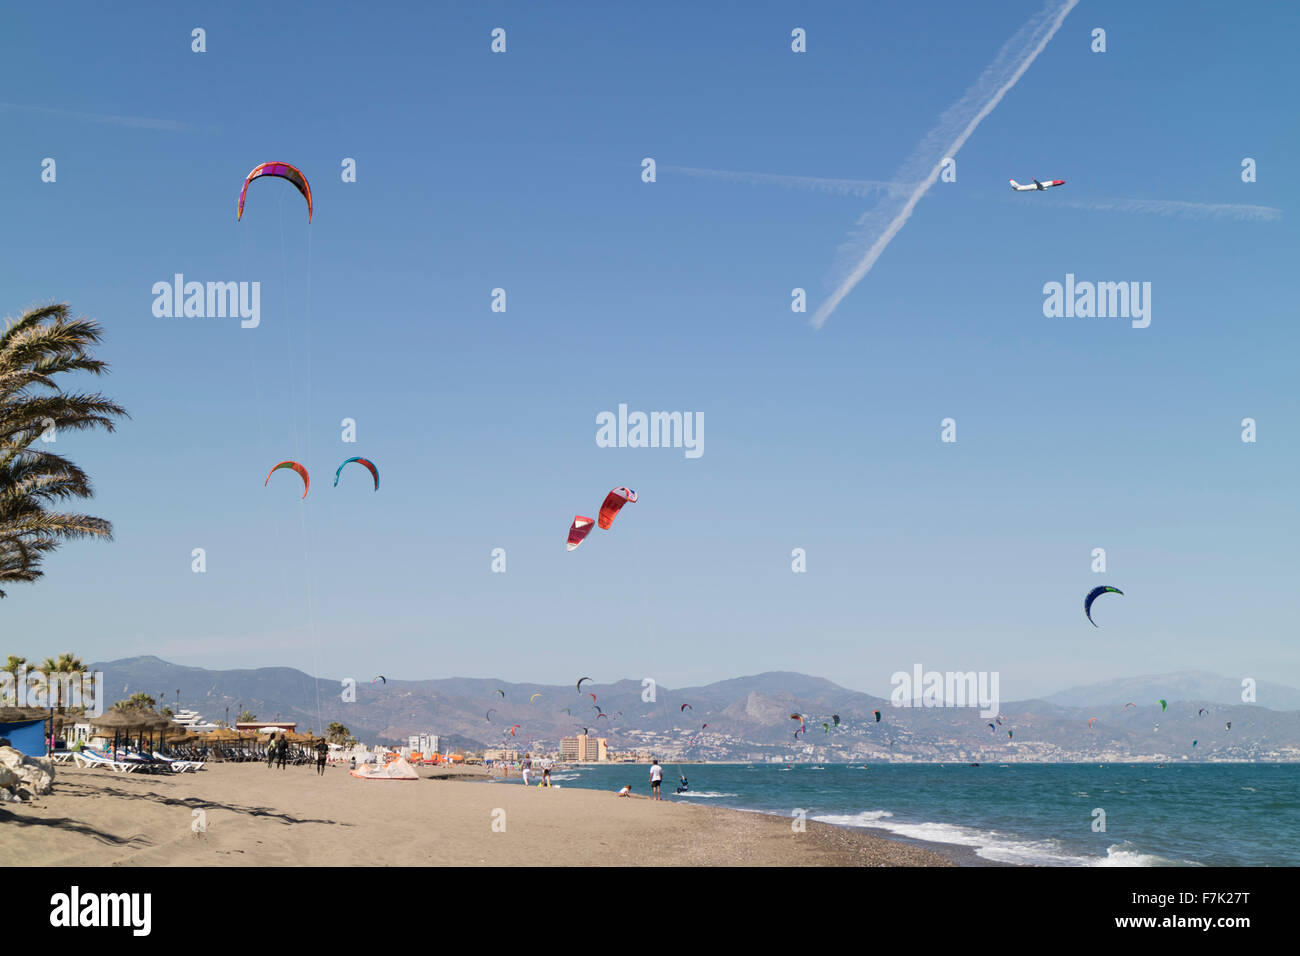 Torremolinos, Costa del Sol, Malaga Province, Andalusia, southern Spain. Kite surfing off Los Alamos beach. Stock Photo